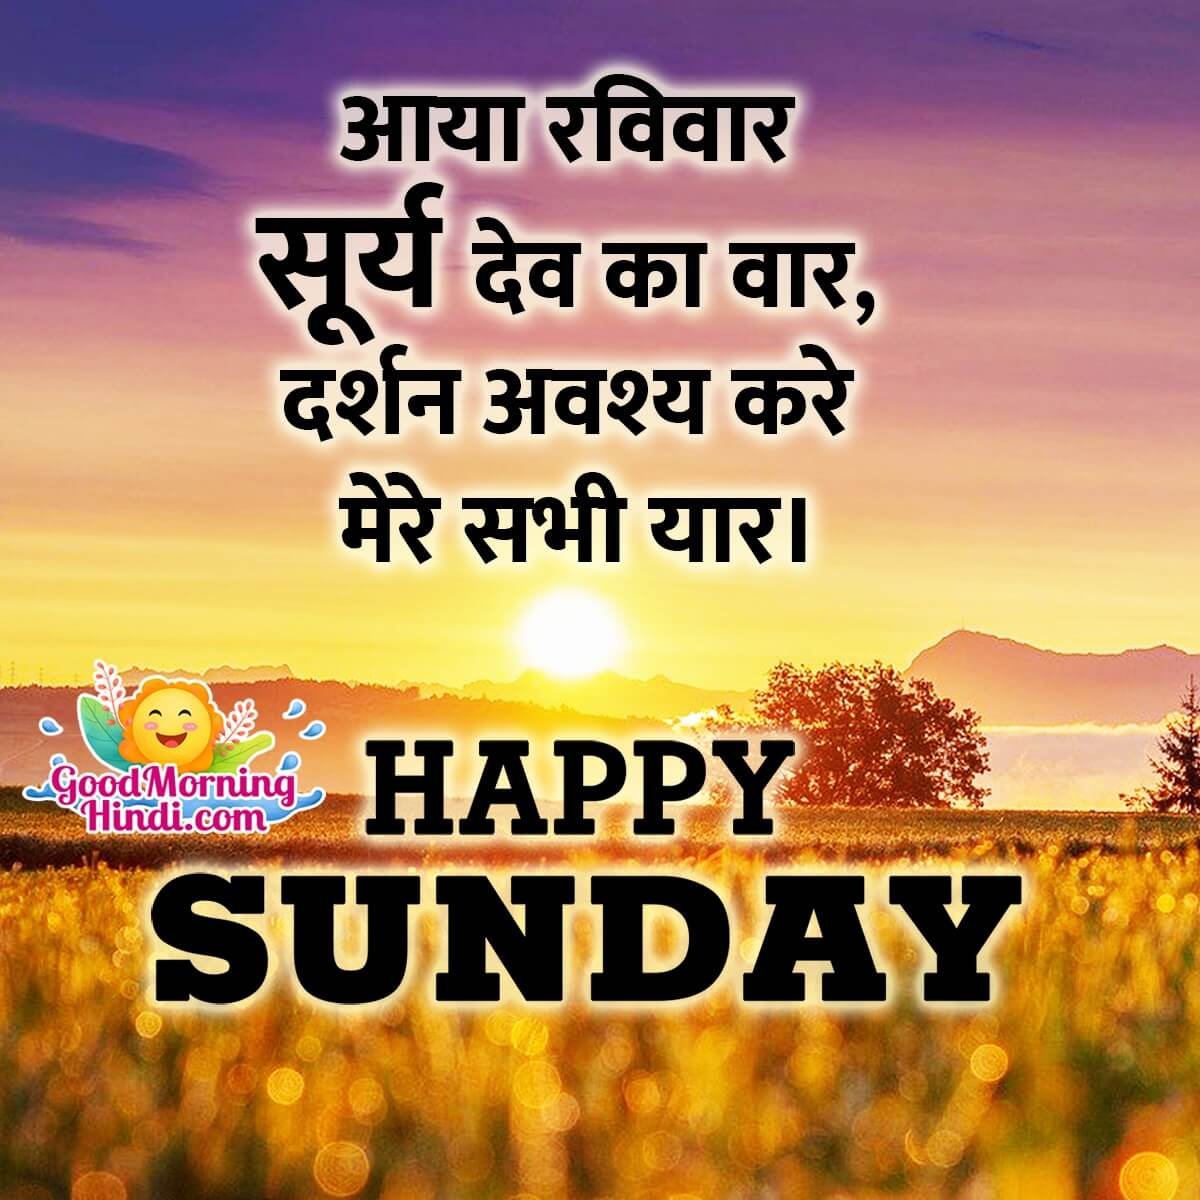 Happy Sunday Hindi Status Images - Good Morning Wishes & Images In ...